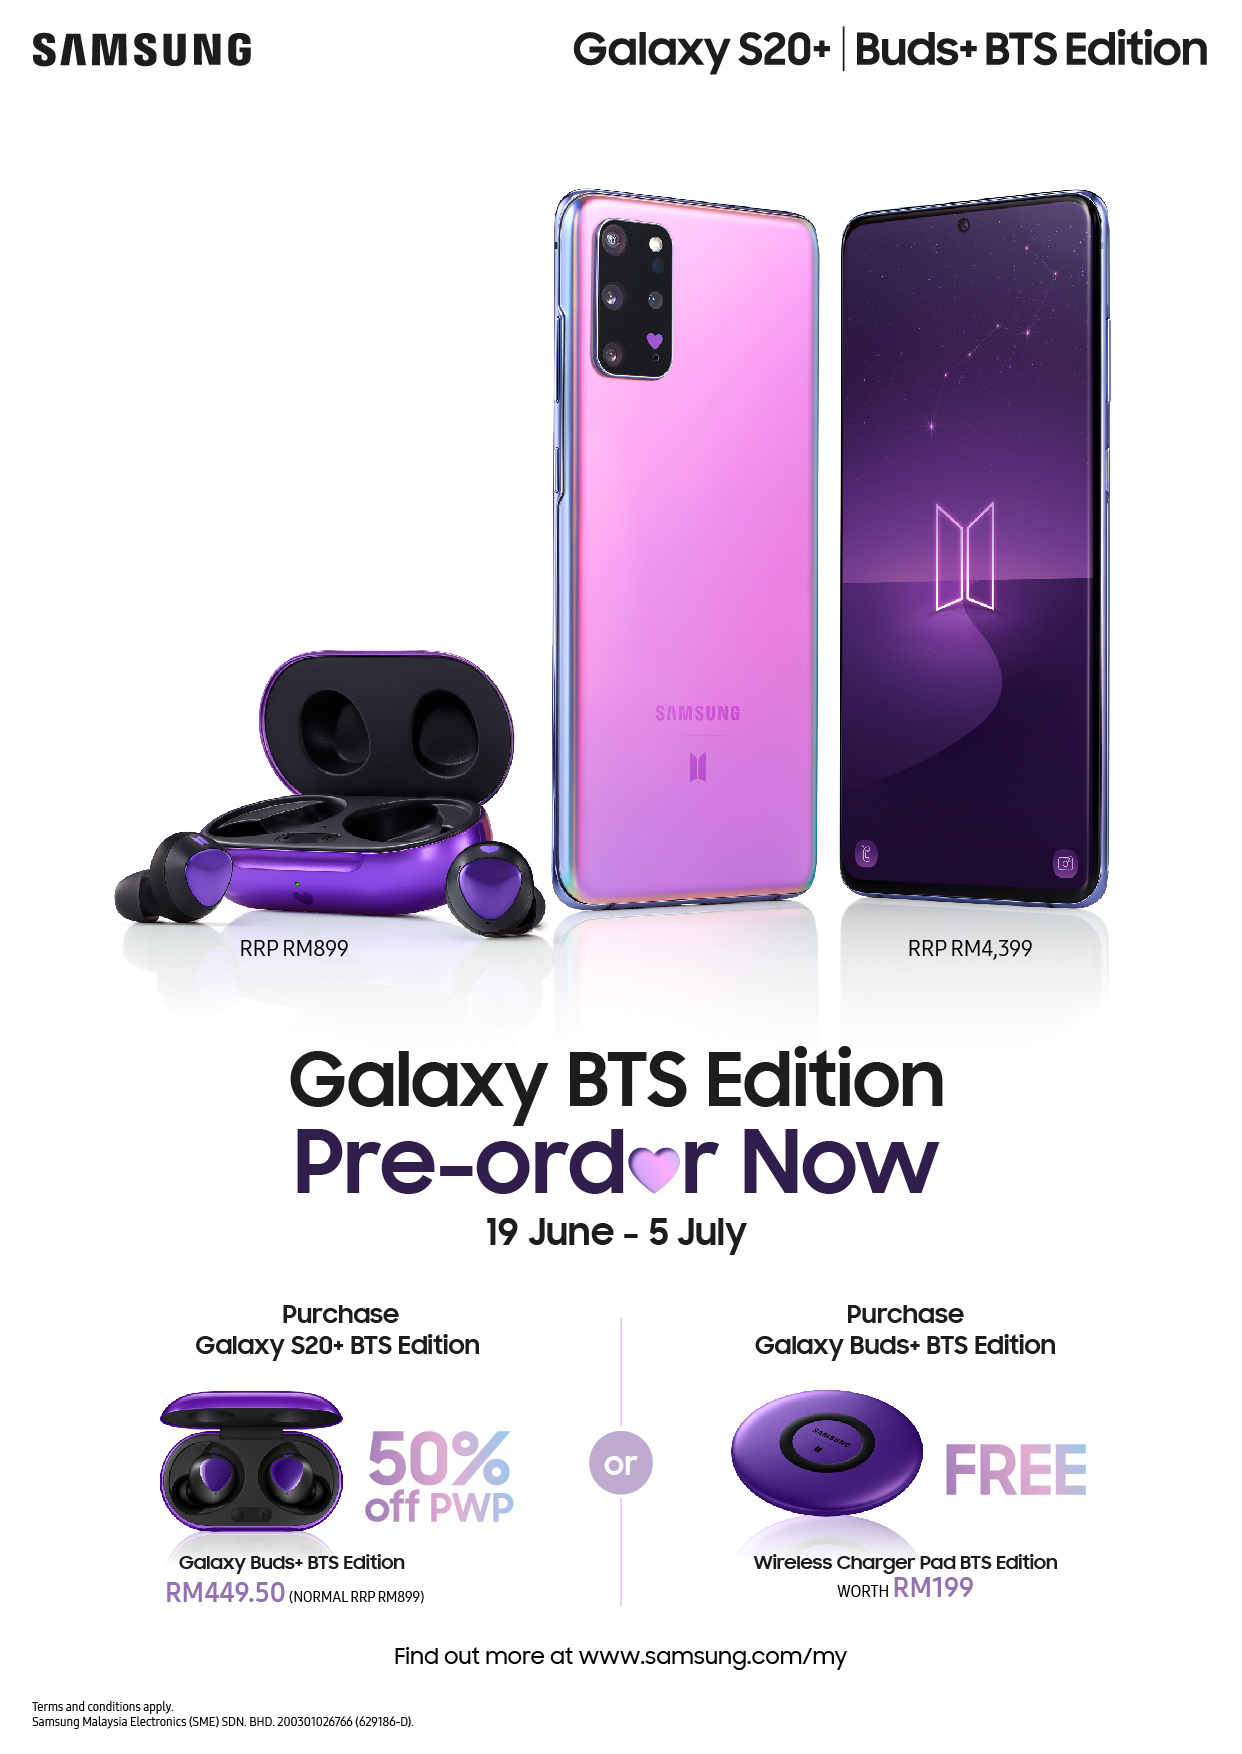 Galaxy S20 and Buds BTS Editions Pre order